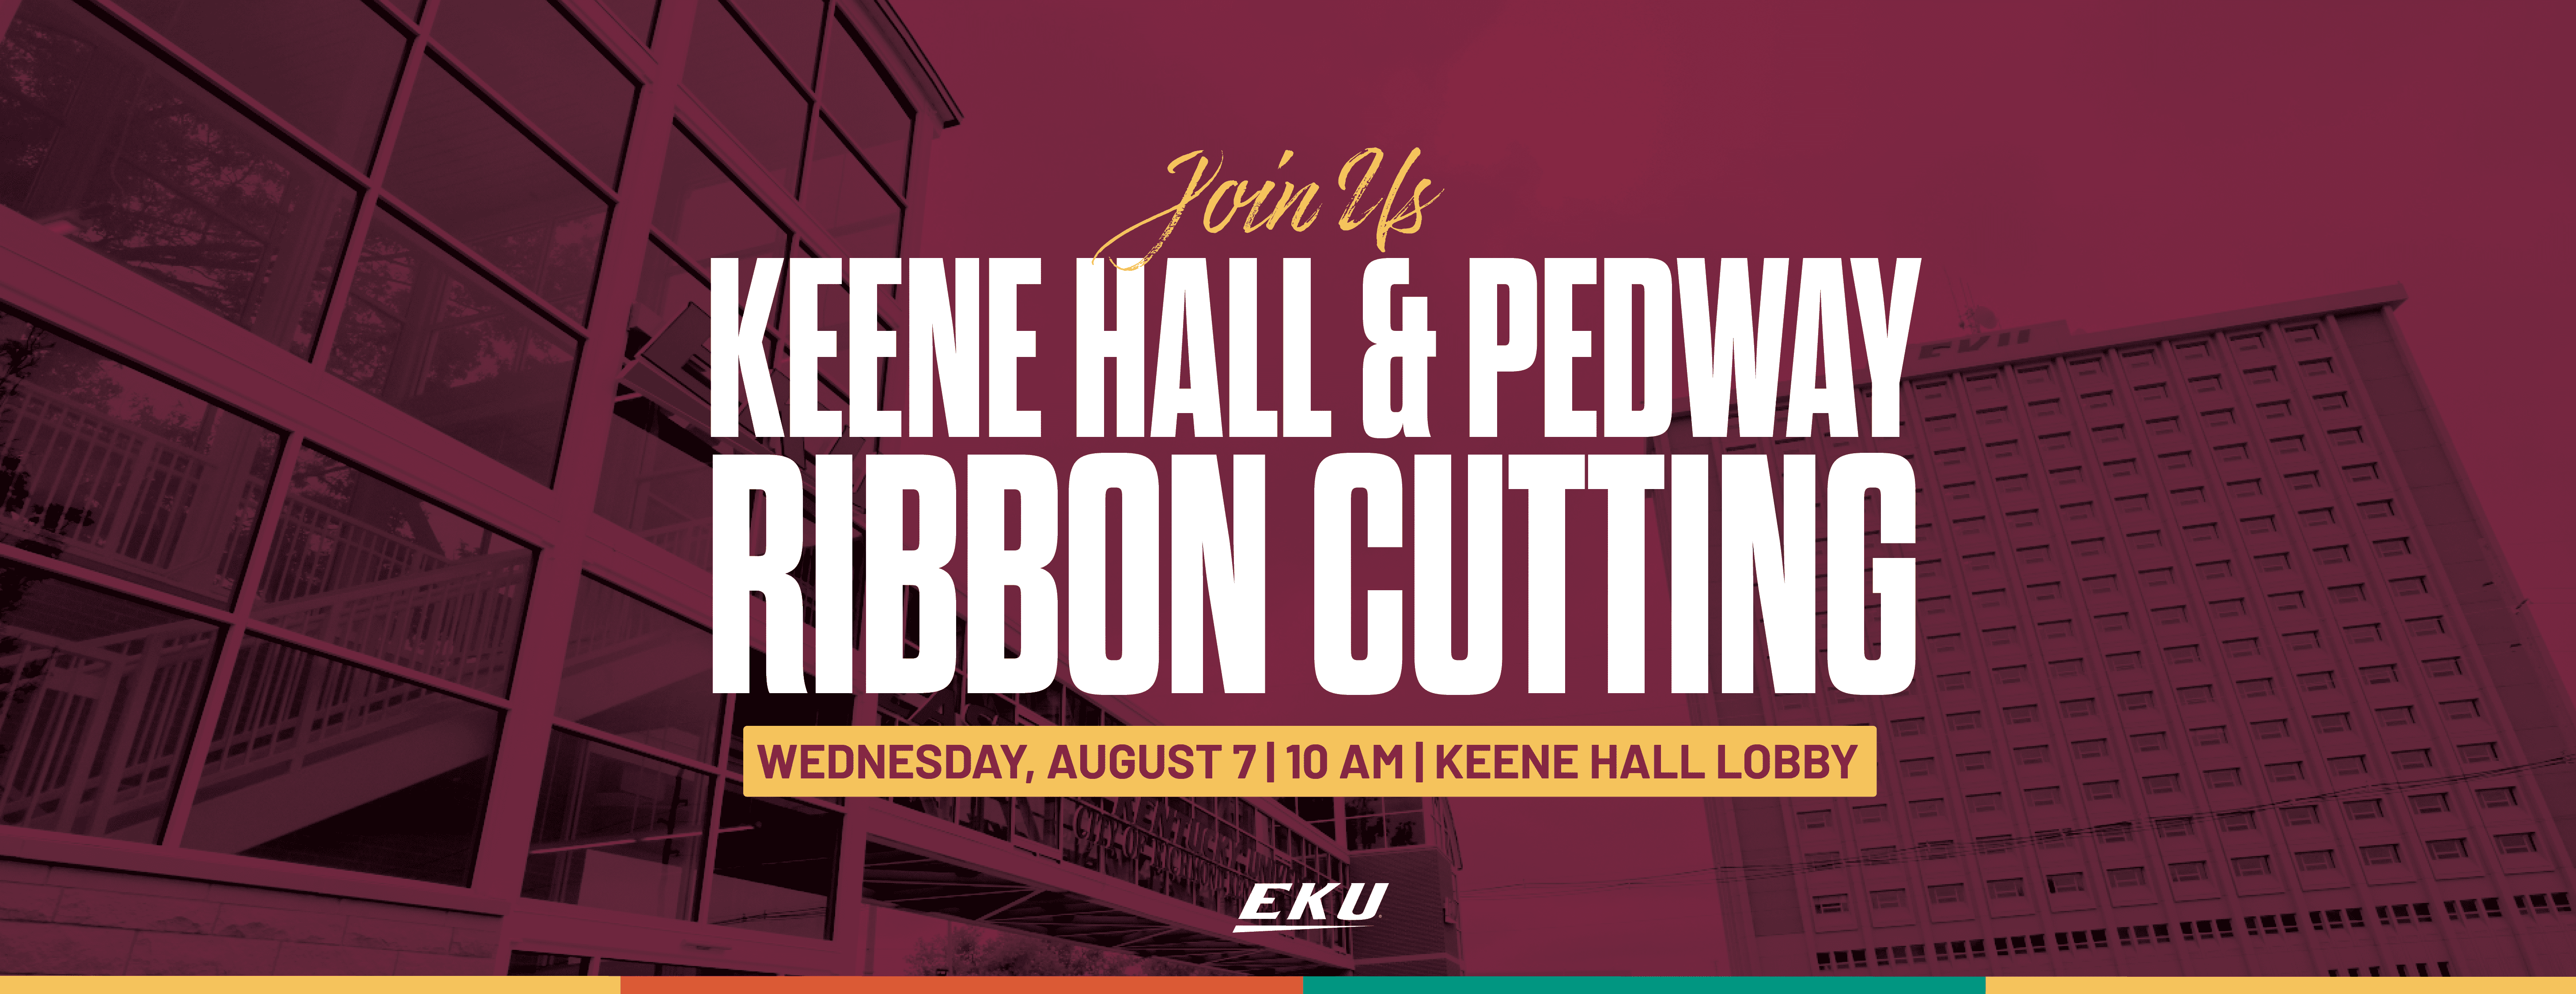 graphic page header with the title "Keene hall & pedway ribbon cutting"